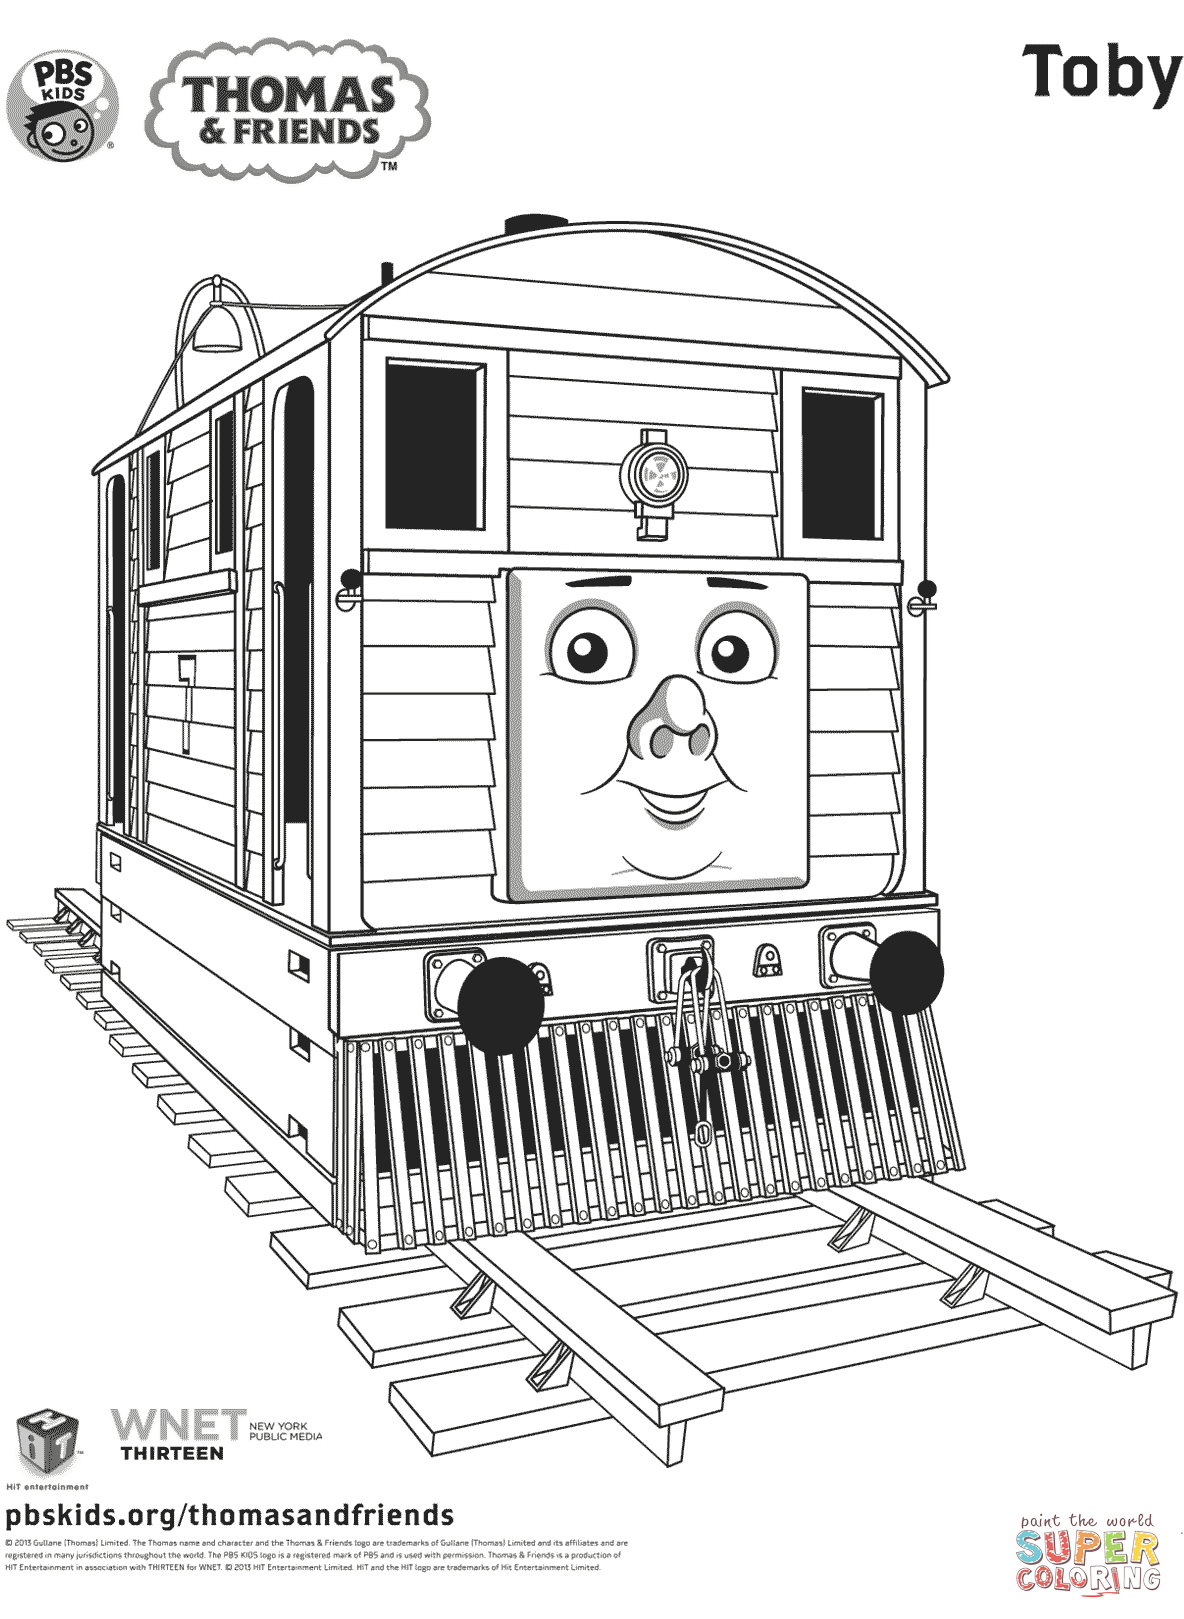 Thomas And Friends Coloring Pages Thomas Friends Coloring Pages Free Coloring Pages